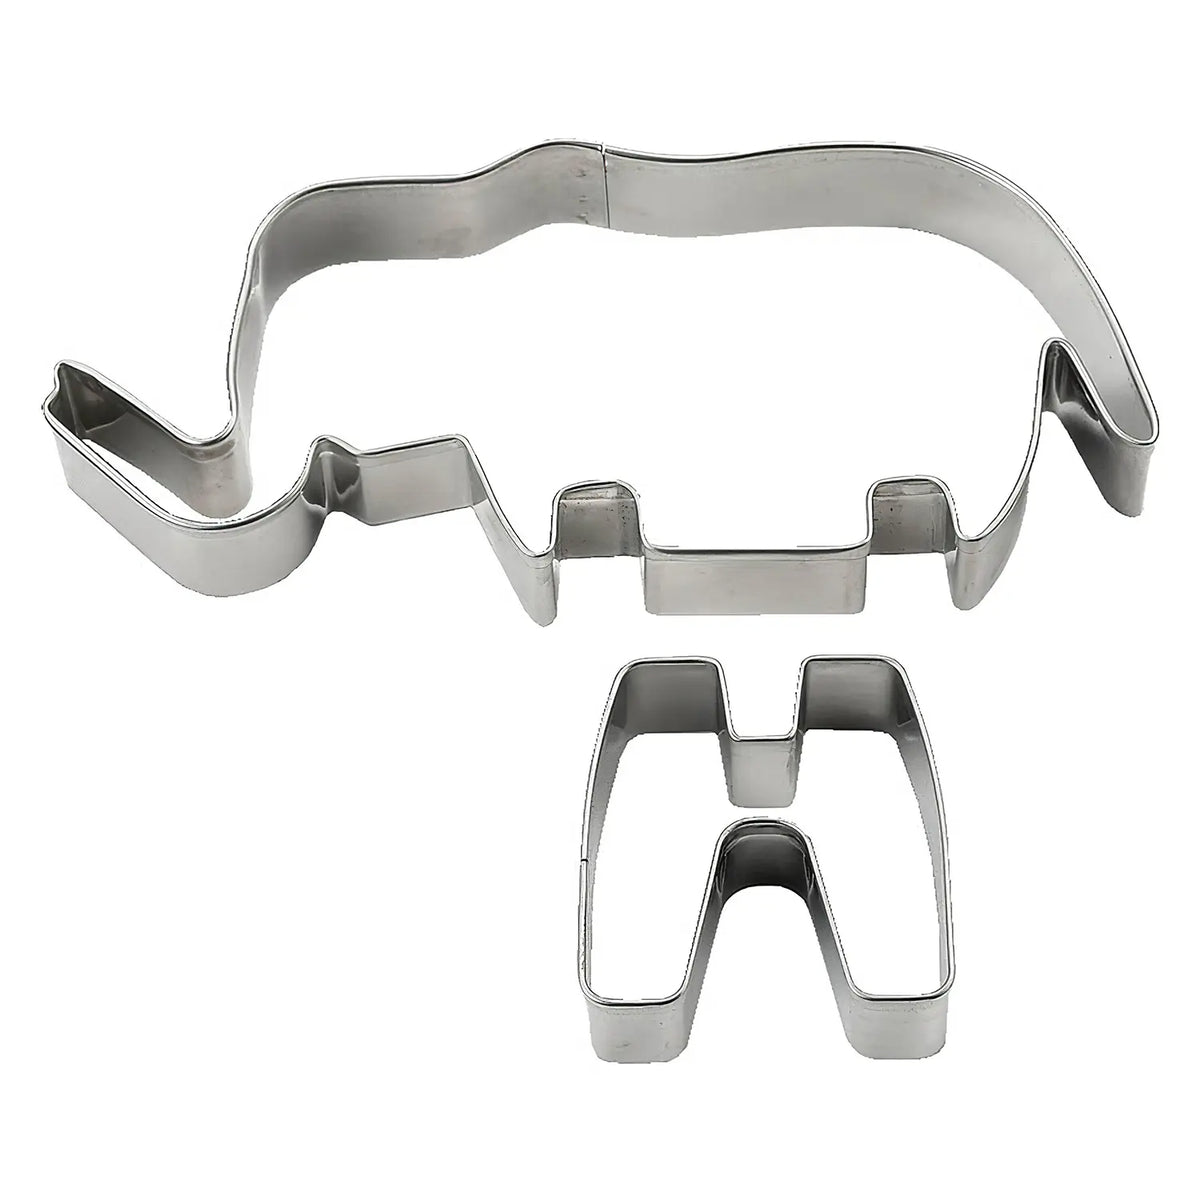 TIGERCROWN Cake Land Stainless Steel Cookie Cutter 3D Elephant